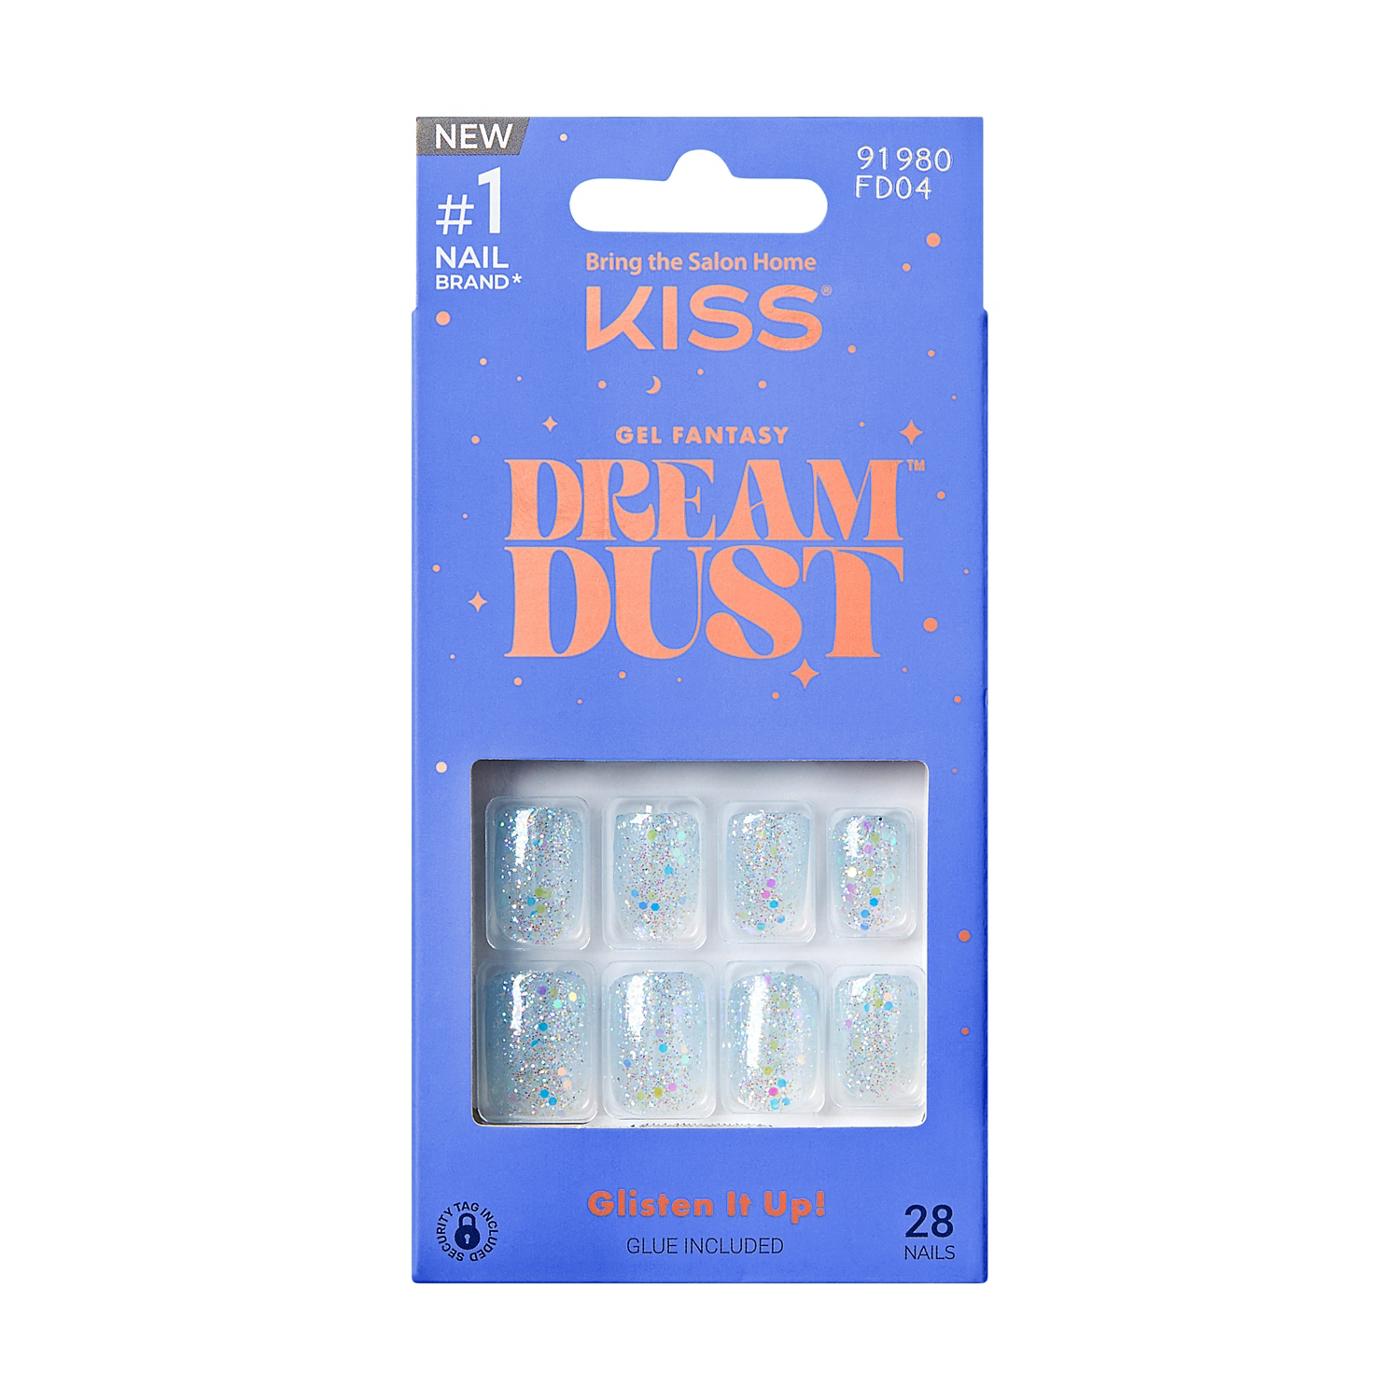 KISS Gel Fantasy Dream Dust Nails - Champagnes; image 1 of 6